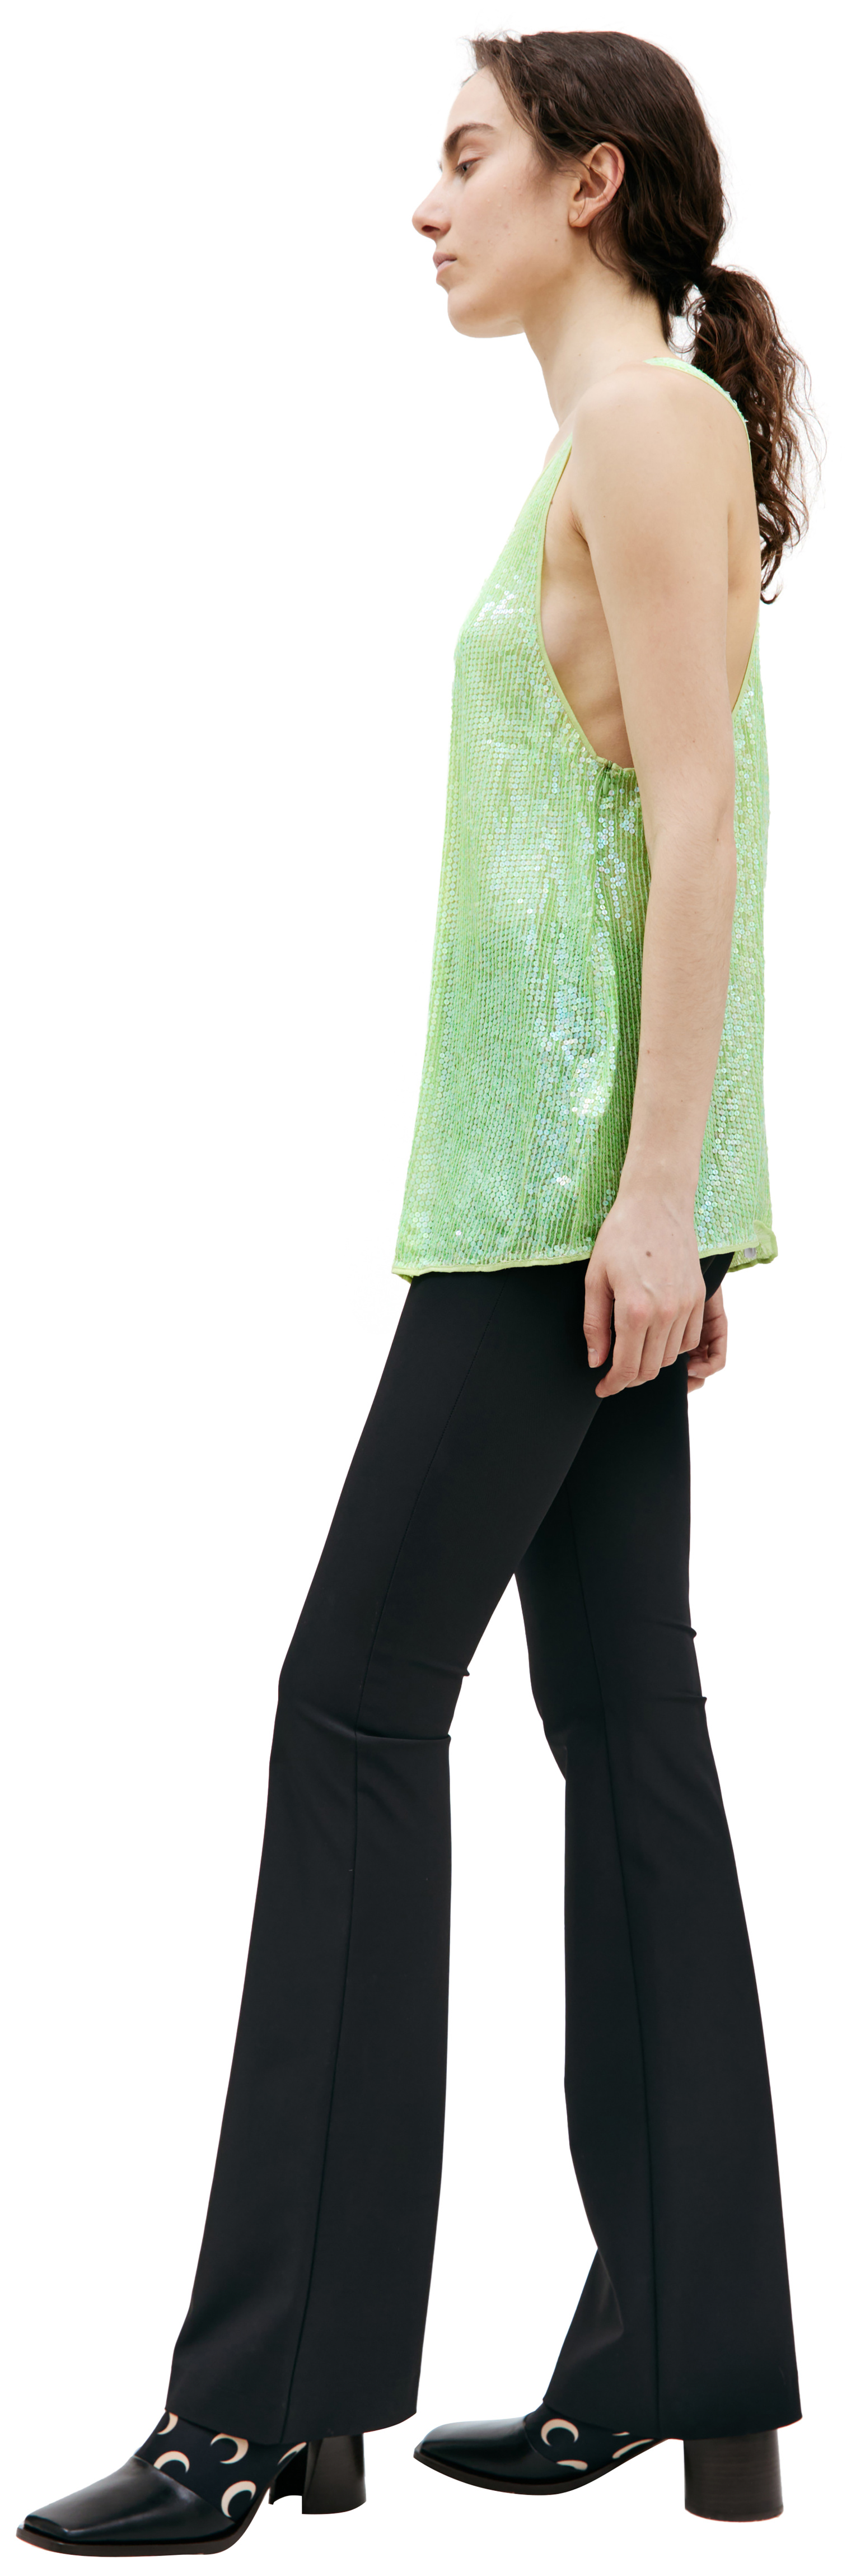 Ashish Green Sequin Embroidered Top